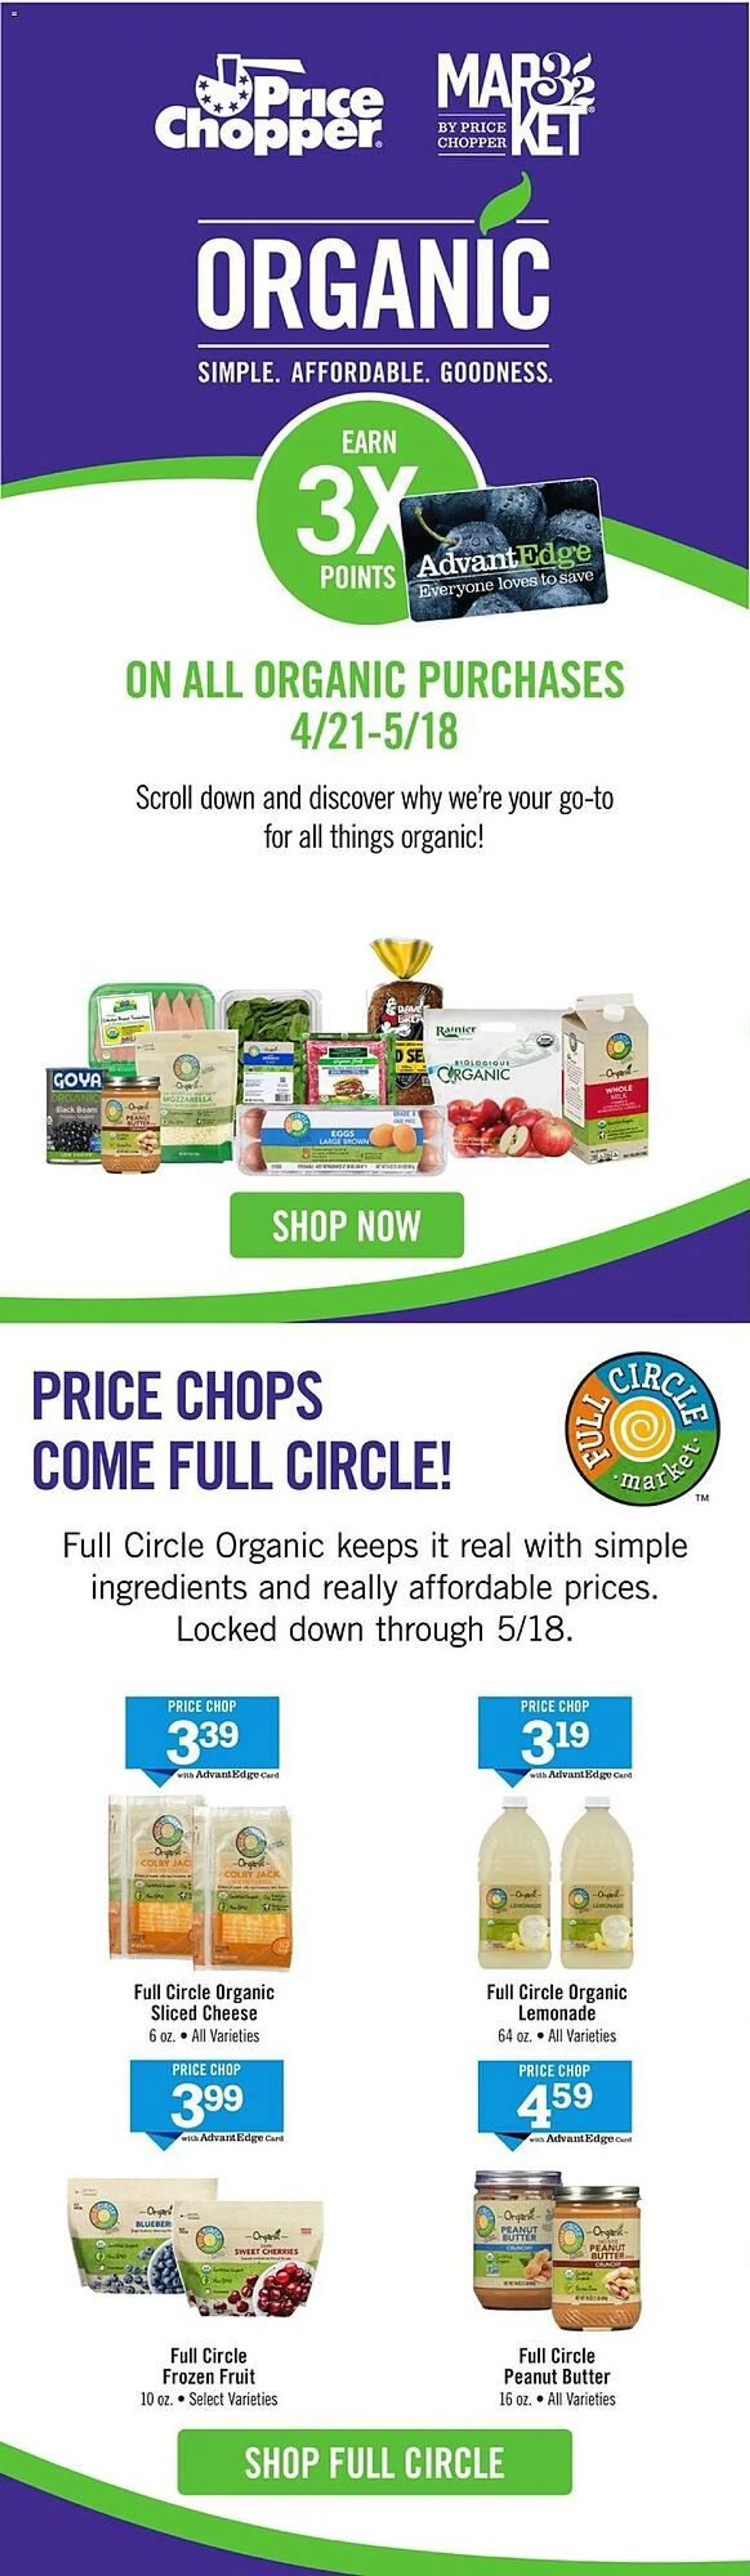 Price Chopper Weekly Ad - 1